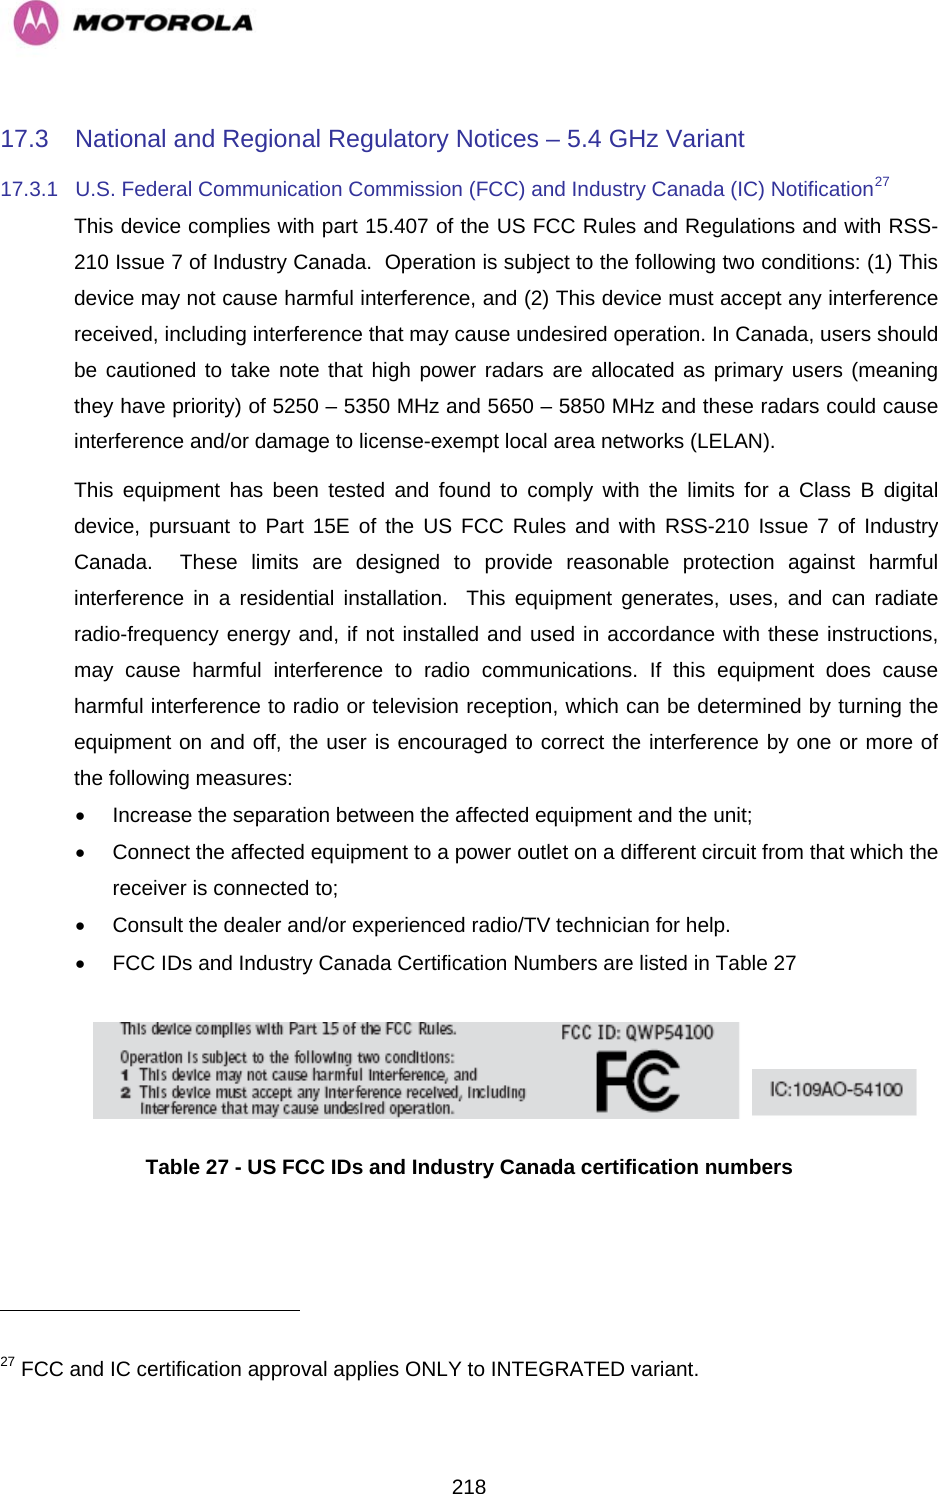   21817.3  National and Regional Regulatory Notices – 5.4 GHz Variant 17.3.1  U.S. Federal Communication Commission (FCC) and Industry Canada (IC) Notification27 This device complies with part 15.407 of the US FCC Rules and Regulations and with RSS-210 Issue 7 of Industry Canada.  Operation is subject to the following two conditions: (1) This device may not cause harmful interference, and (2) This device must accept any interference received, including interference that may cause undesired operation. In Canada, users should be cautioned to take note that high power radars are allocated as primary users (meaning they have priority) of 5250 – 5350 MHz and 5650 – 5850 MHz and these radars could cause interference and/or damage to license-exempt local area networks (LELAN). This equipment has been tested and found to comply with the limits for a Class B digital device, pursuant to Part 15E of the US FCC Rules and with RSS-210 Issue 7 of Industry Canada.  These limits are designed to provide reasonable protection against harmful interference in a residential installation.  This equipment generates, uses, and can radiate radio-frequency energy and, if not installed and used in accordance with these instructions, may cause harmful interference to radio communications. If this equipment does cause harmful interference to radio or television reception, which can be determined by turning the equipment on and off, the user is encouraged to correct the interference by one or more of the following measures: •  Increase the separation between the affected equipment and the unit; •  Connect the affected equipment to a power outlet on a different circuit from that which the receiver is connected to; •  Consult the dealer and/or experienced radio/TV technician for help. •  FCC IDs and Industry Canada Certification Numbers are listed in Table 27      Table 27 - US FCC IDs and Industry Canada certification numbers                                                        27 FCC and IC certification approval applies ONLY to INTEGRATED variant. 